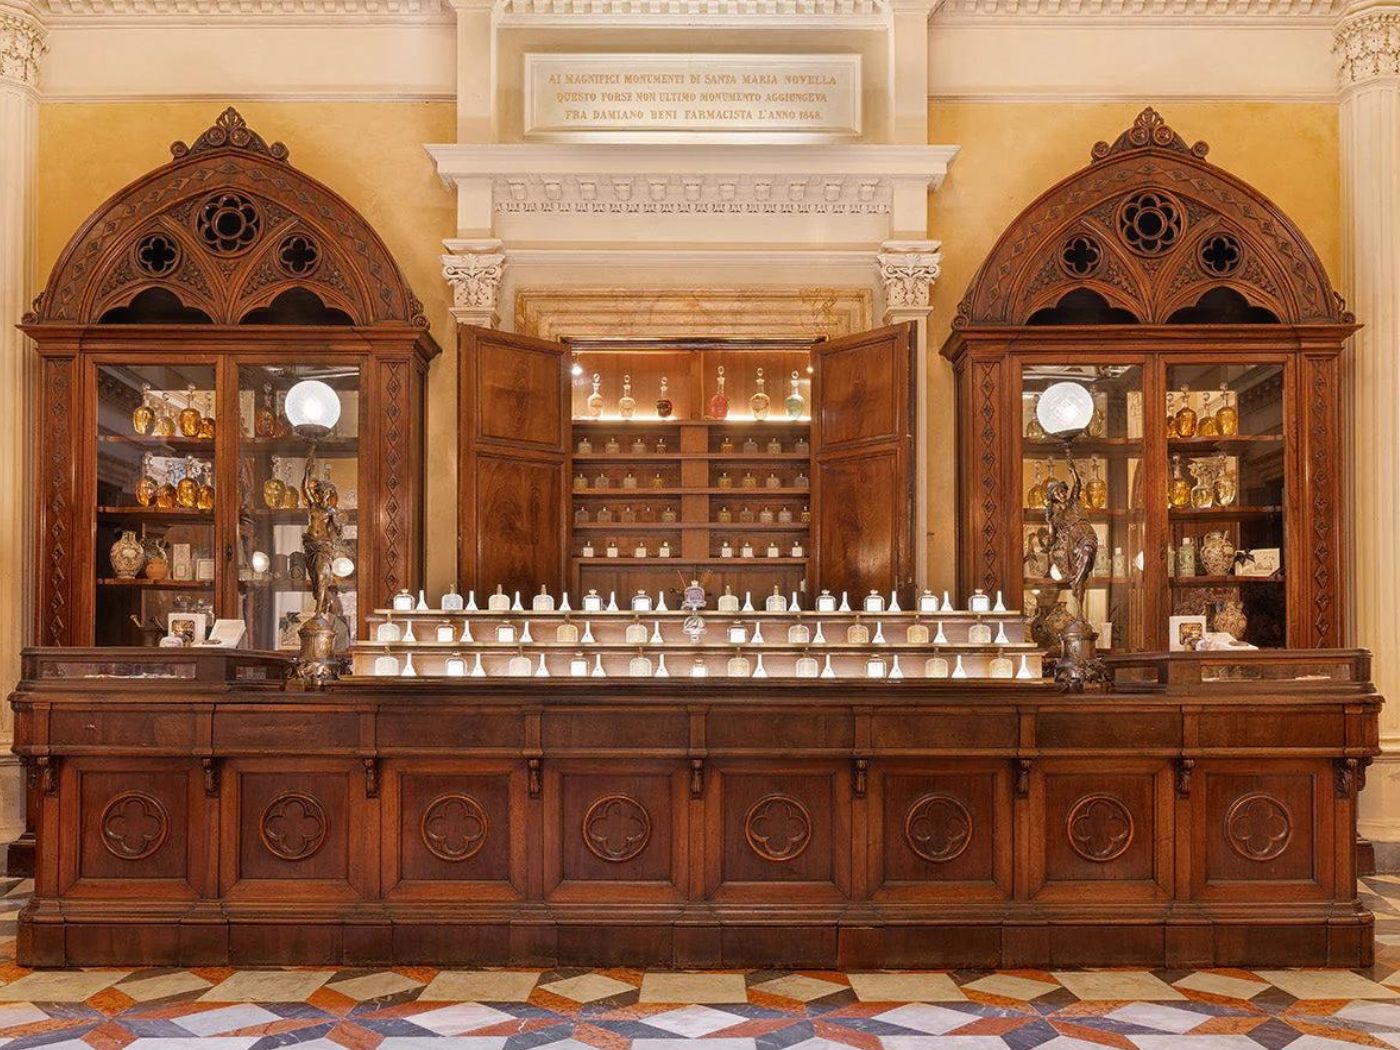 An old-fashioned apothecary-style counter, with old-fashioned glass perfume bottles on display and in glass cabinets in a historic old church building.